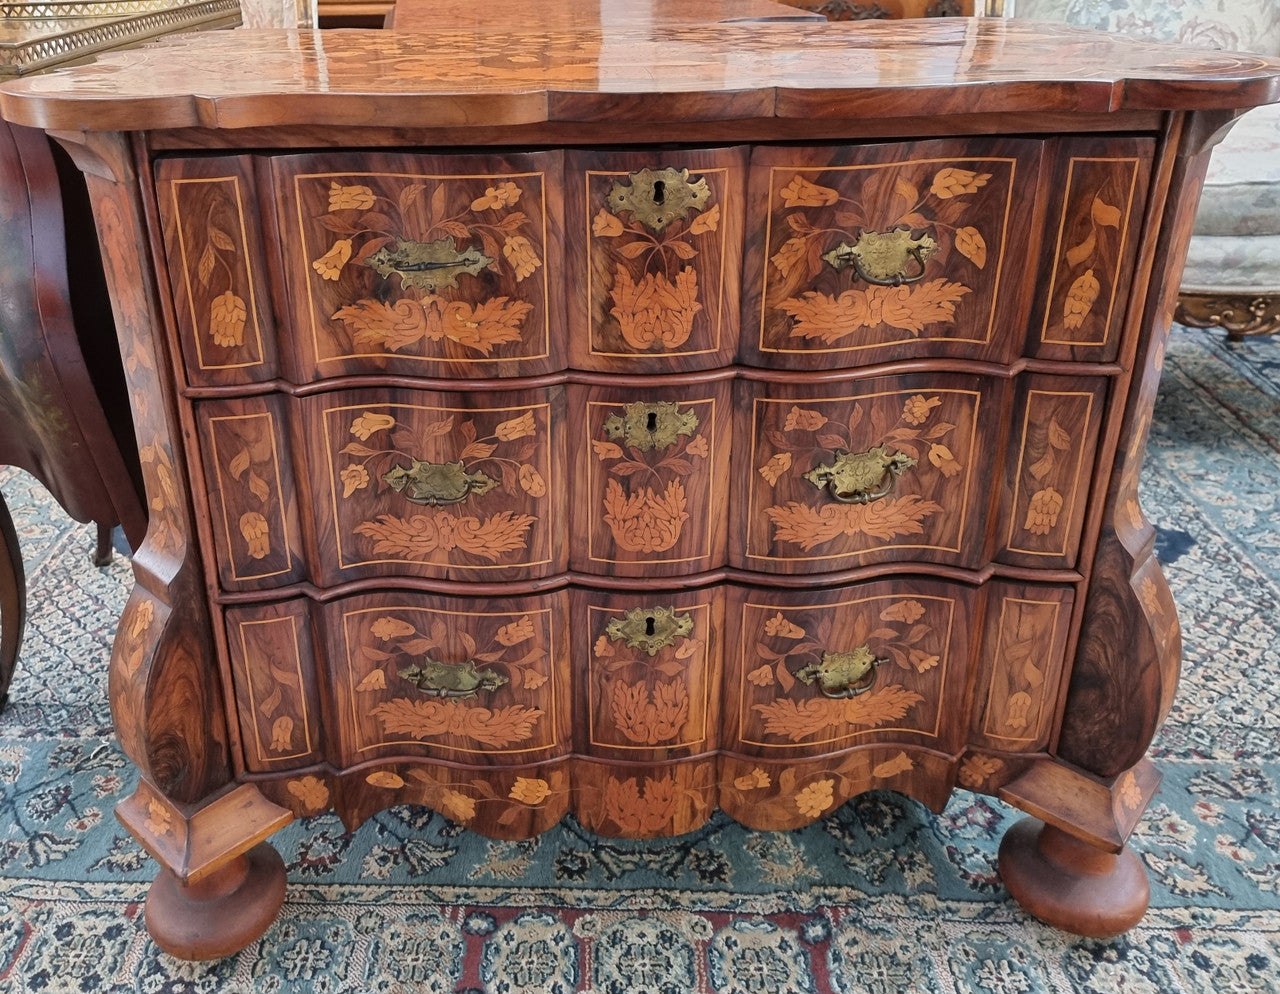 Very Fine highly decorative 18th century Dutch 3 drawer commode. It retains its original brass hardware and Escutcheons. In very good original detailed condition.